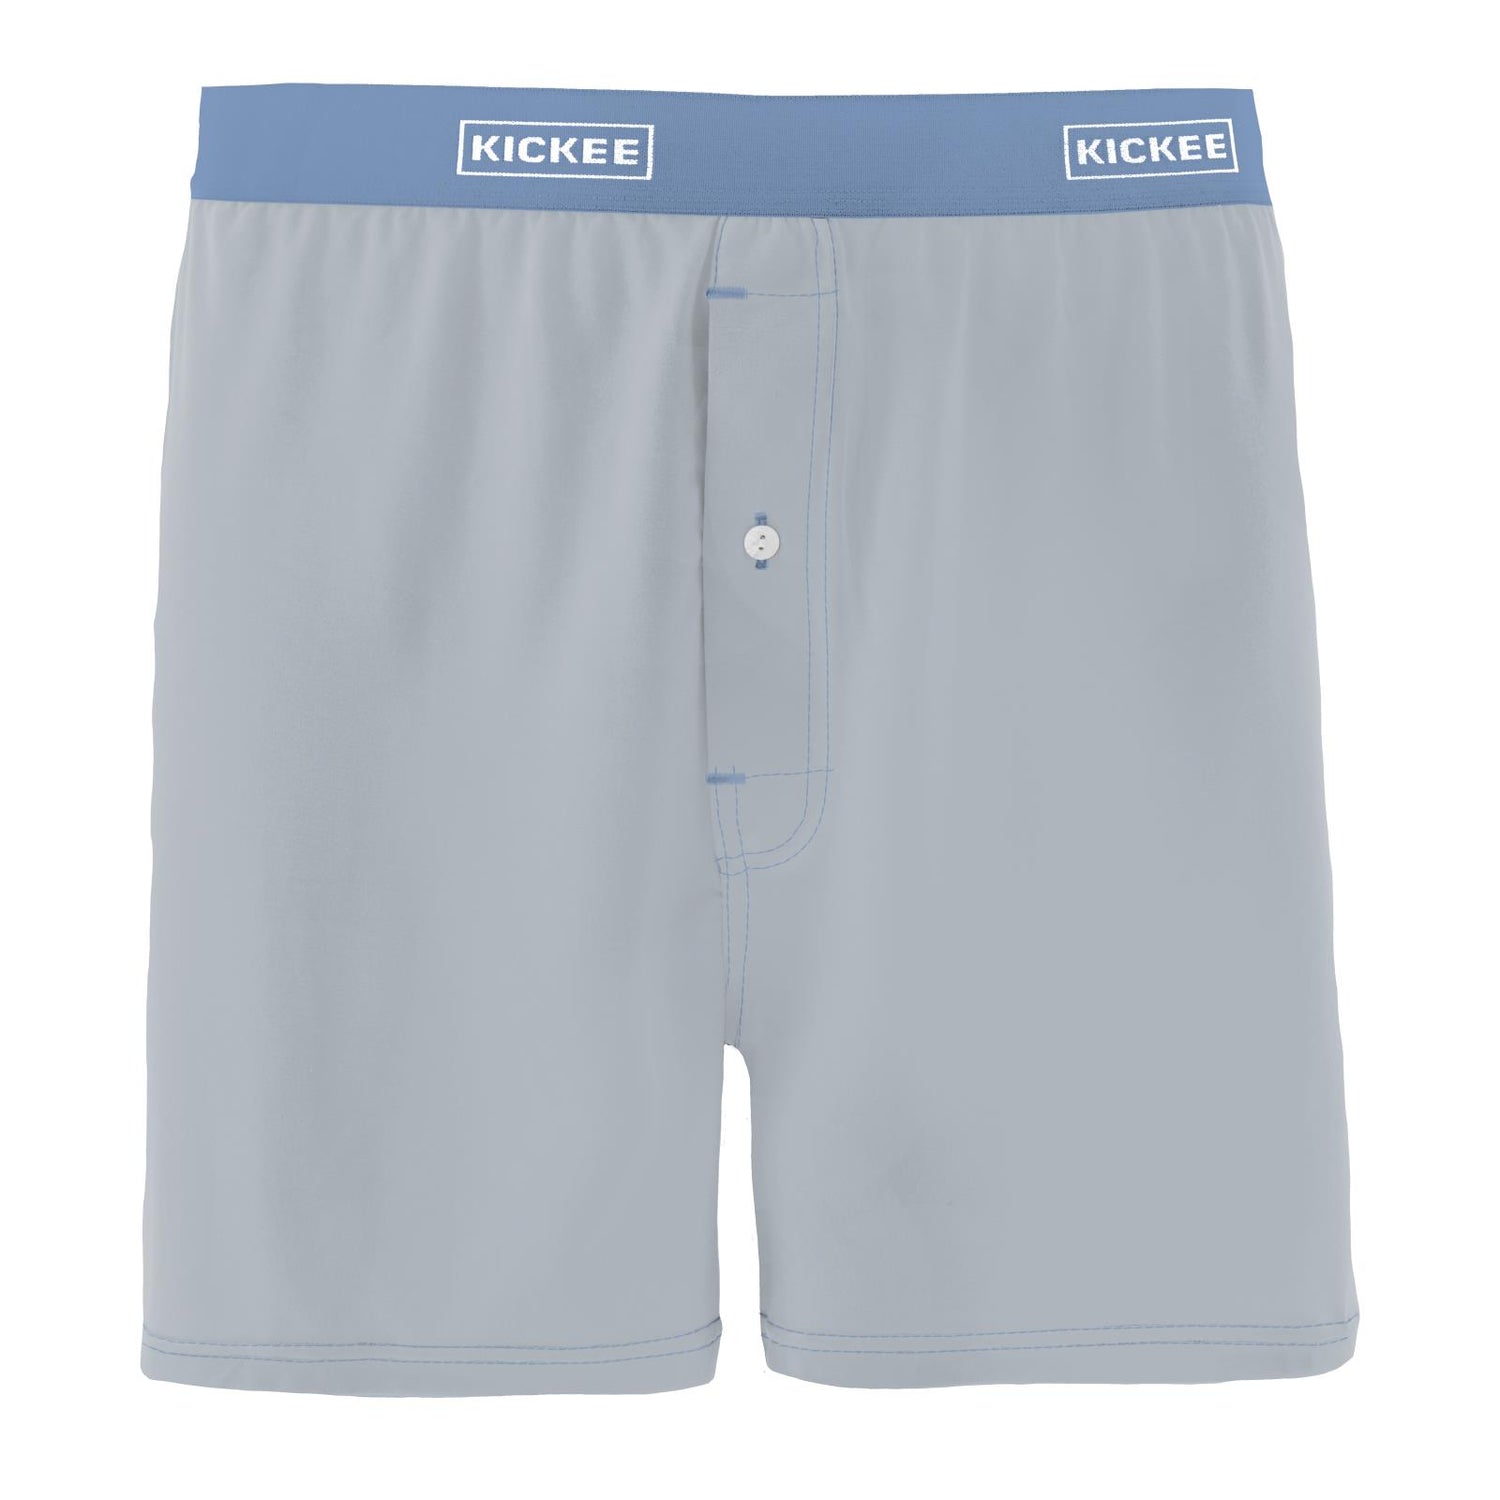 Men's Boxer Shorts in Pearl Blue with Dream Blue